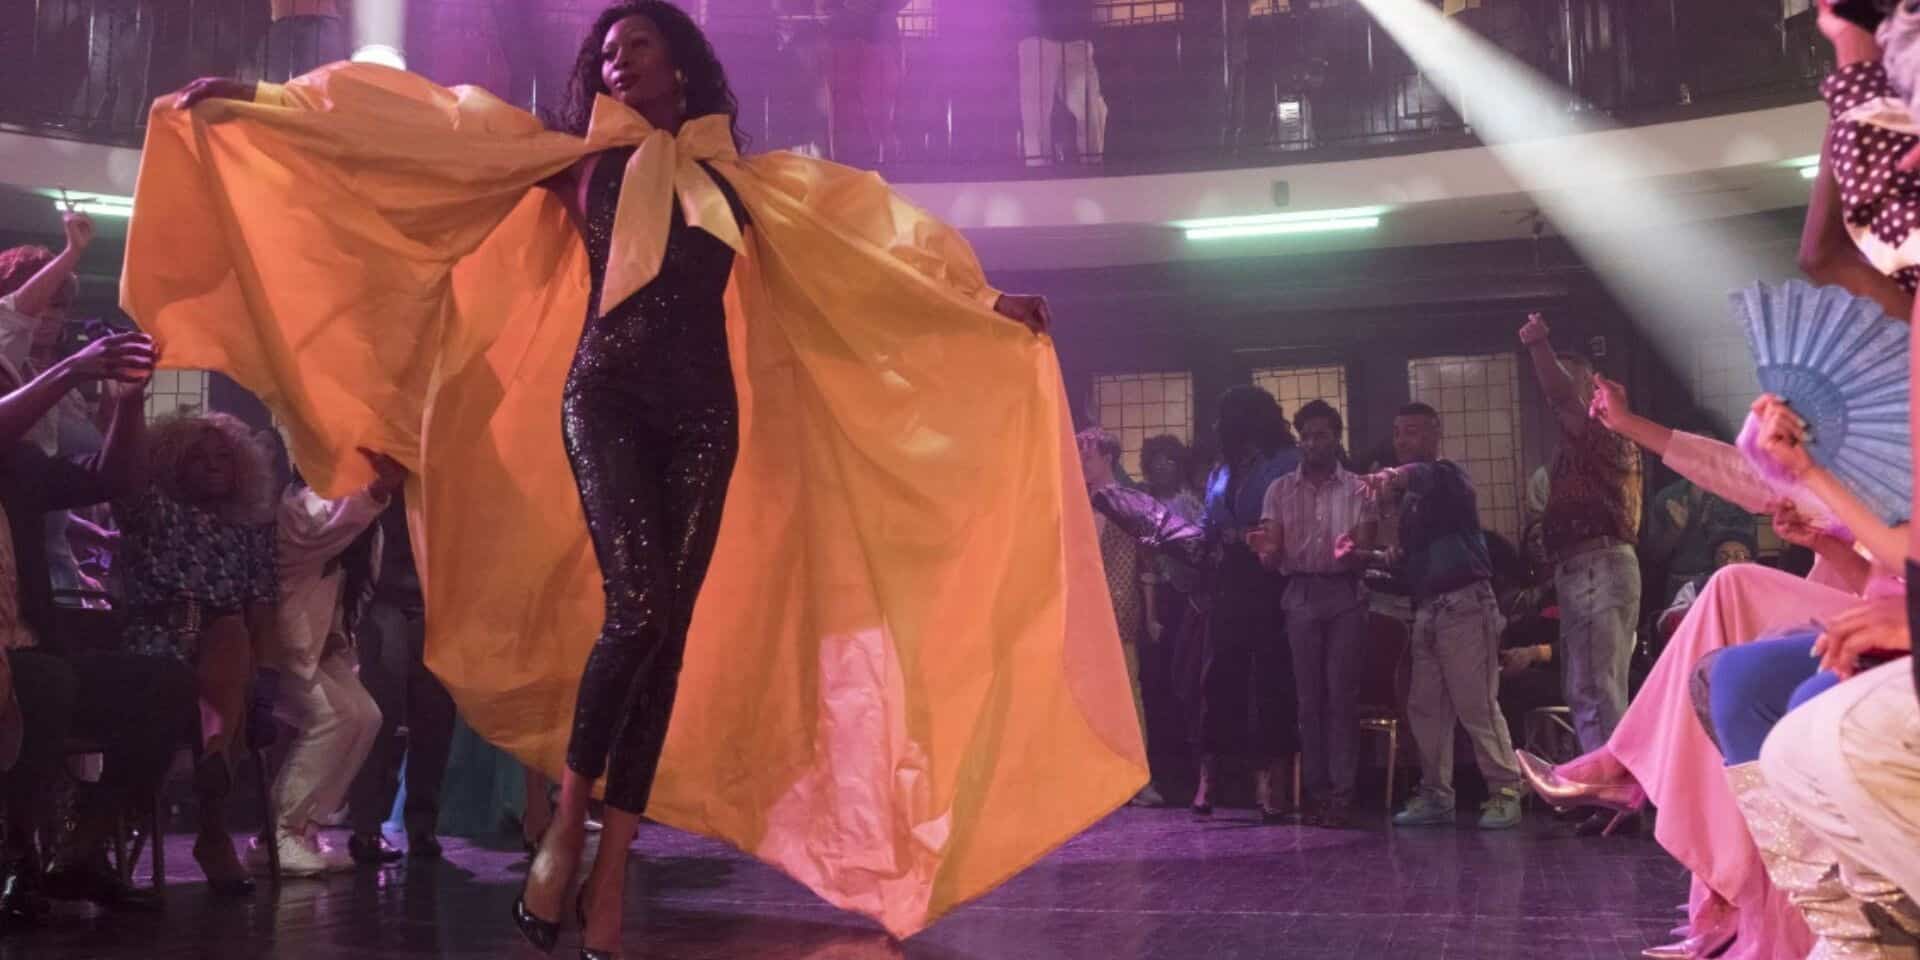 Dominique Jackson walks in a yellow cape during a ball in this image from FXP.